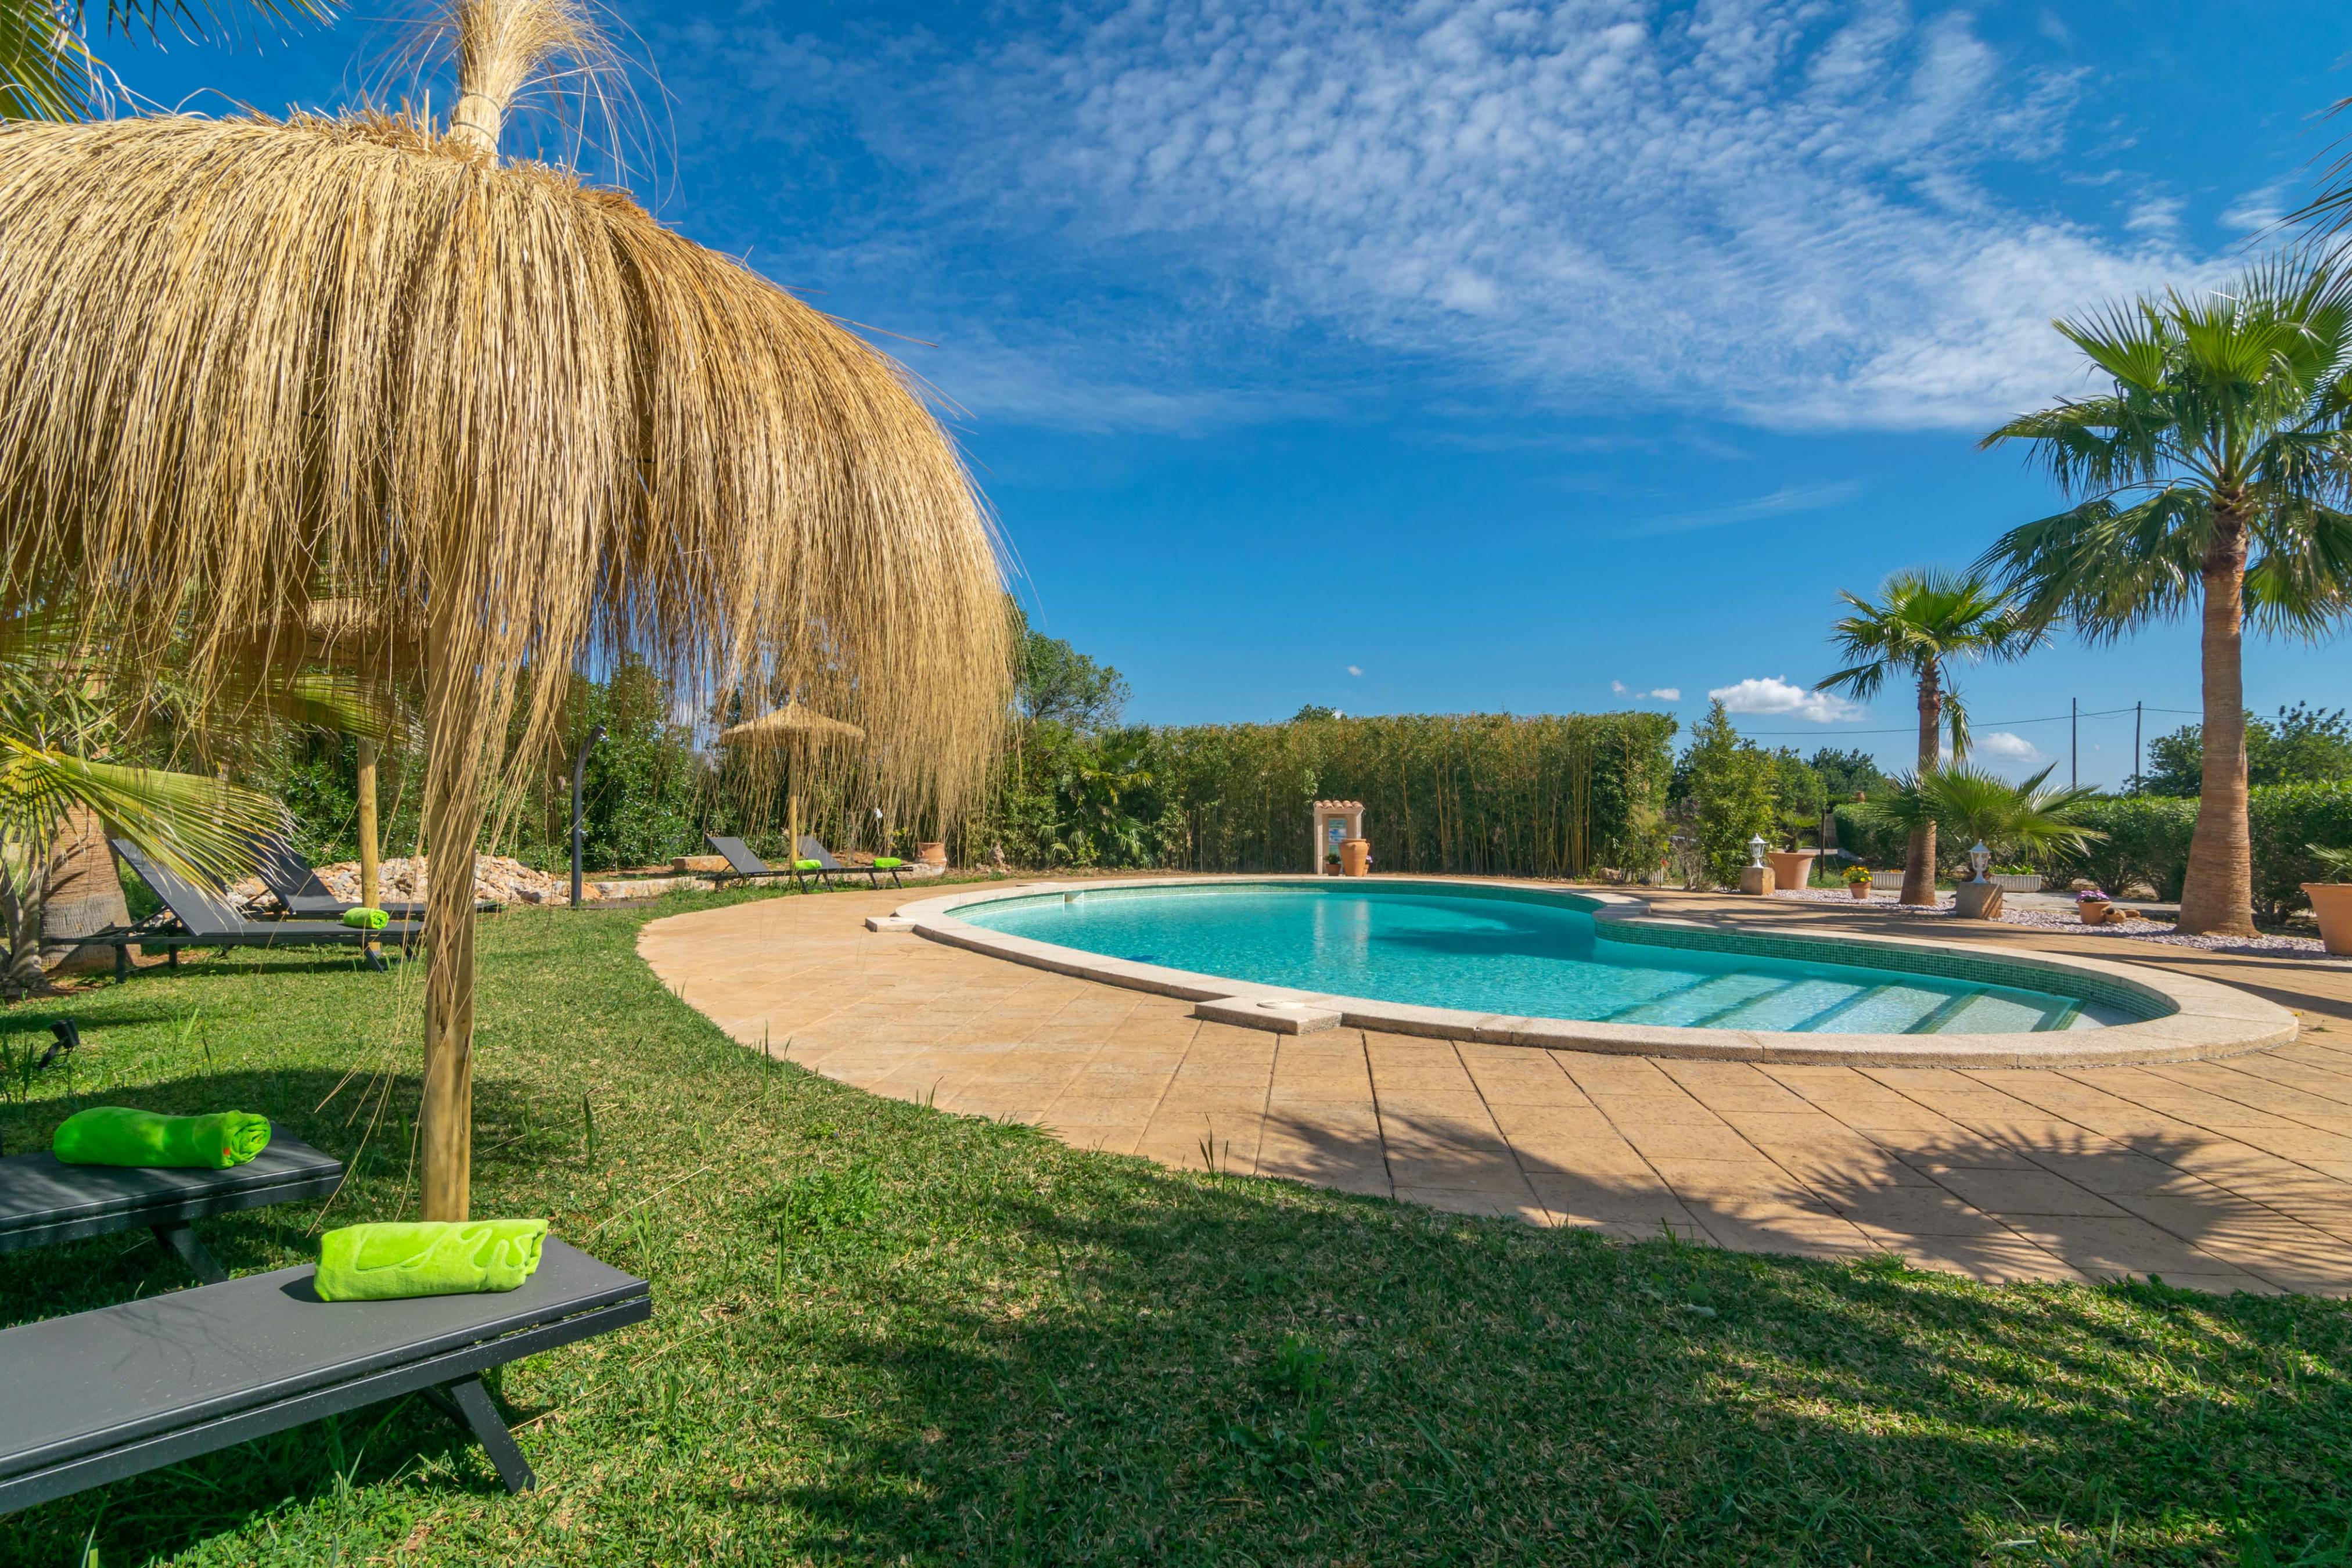 Property Image 2 - FINCA ARIA - Wonderful villa with private pool and free WiFi.